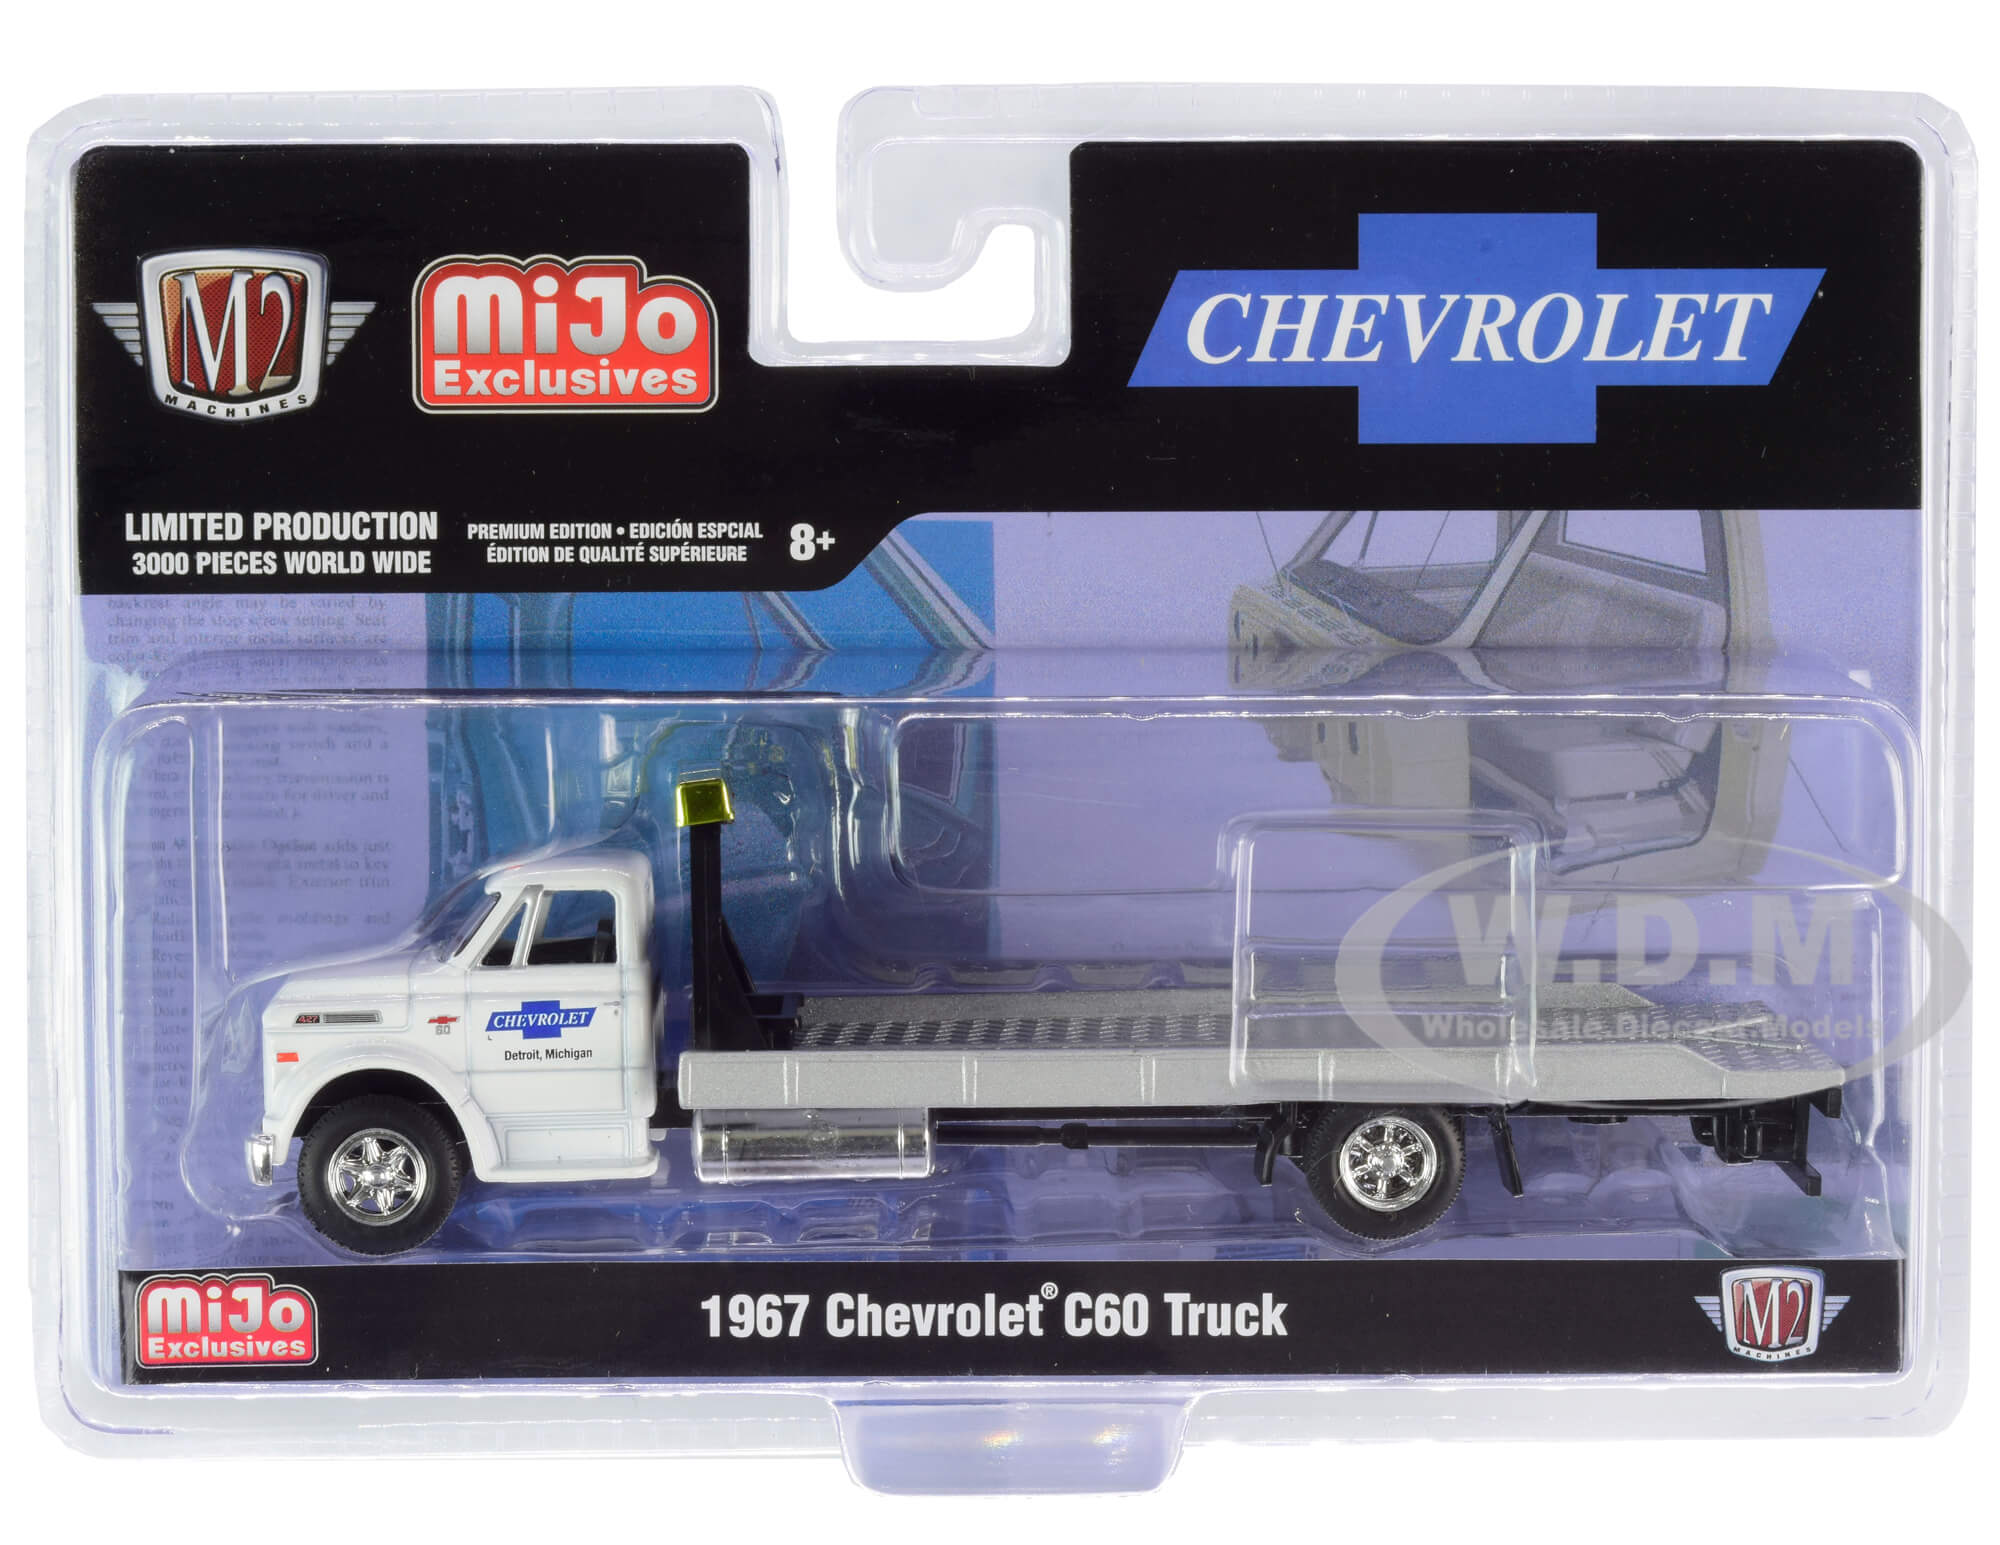 1967 Chevrolet C60 Flatbed Truck White "chevrolet" (detroit Michigan) Limited Edition To 3000 Pieces Worldwide 1/64 Diecast Model By M2 Machines